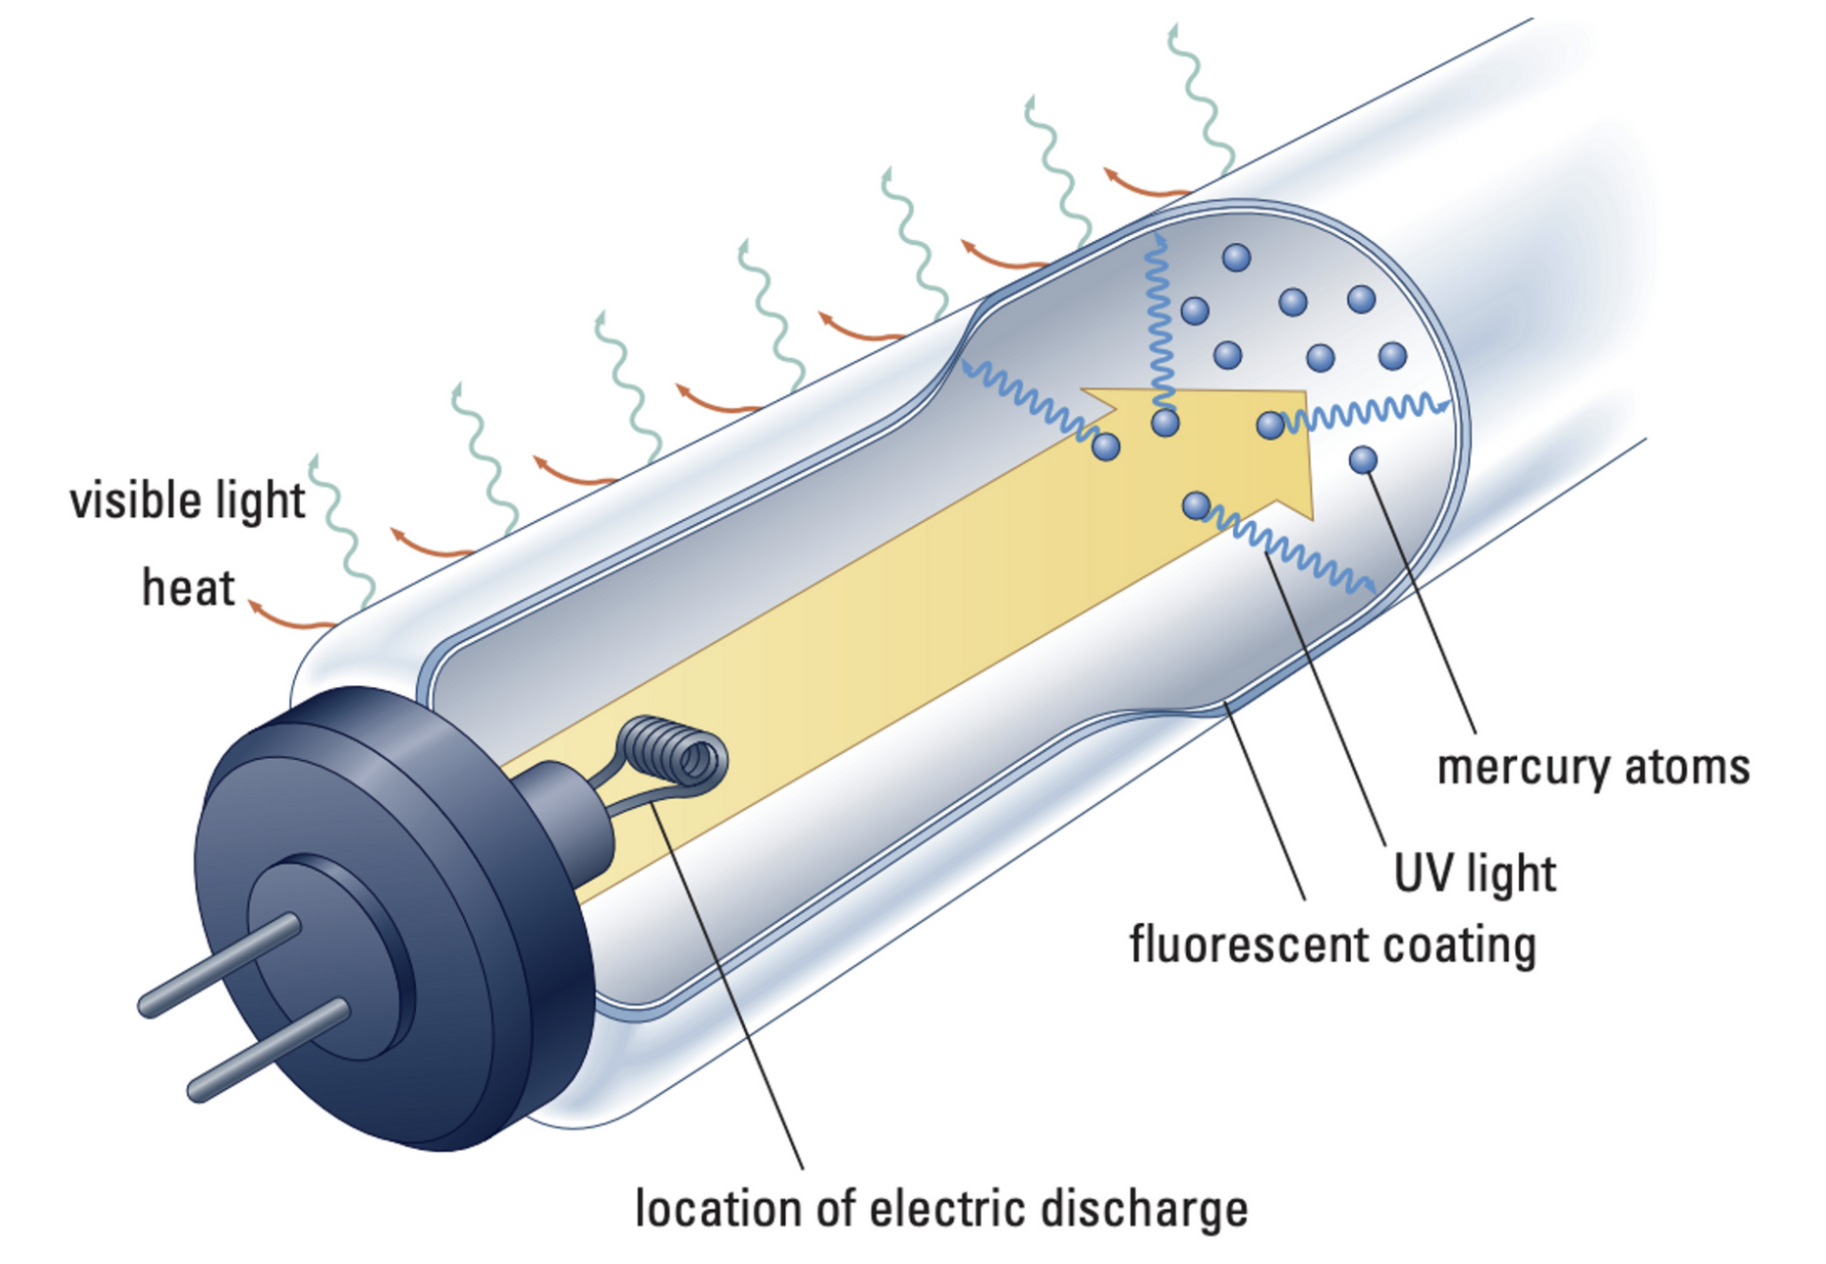 <ul><li><p>Fluorescent lights make use of both electric discharge and fluorescence</p><ul><li><p>Tube is filled with low-pressure mercury vapour and the inner surface is coated with a fluorescent material.</p></li><li><p>When turned on, the electric current causes the mercury atoms to emit ultraviolet light.</p></li><li><p>UV light then strikes the fluorescent inner surface of the tube, resulting in the production of visible light.</p></li></ul></li></ul>